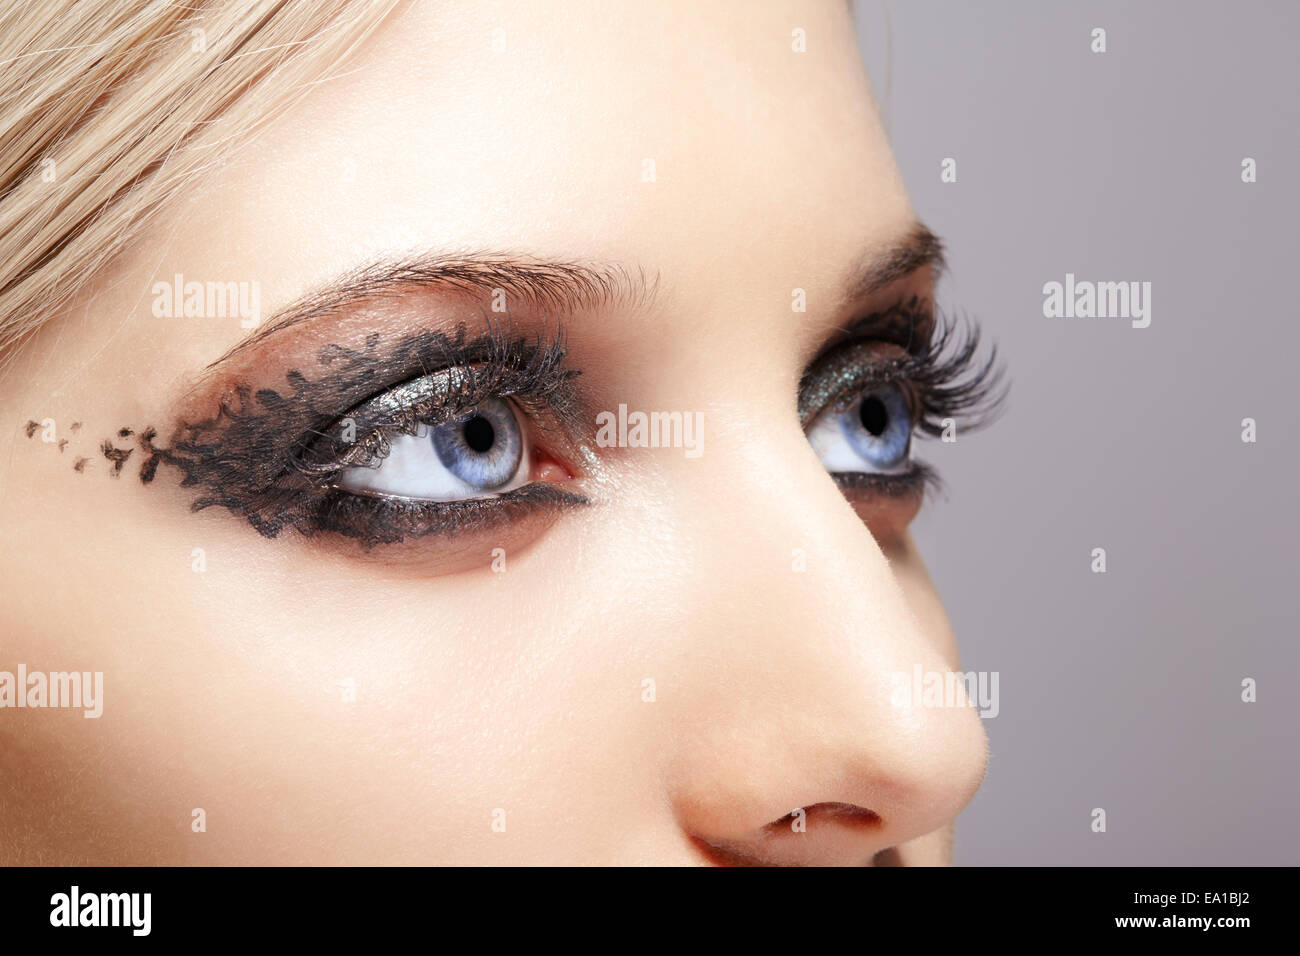 woman eyes with day makeup Stock Photo